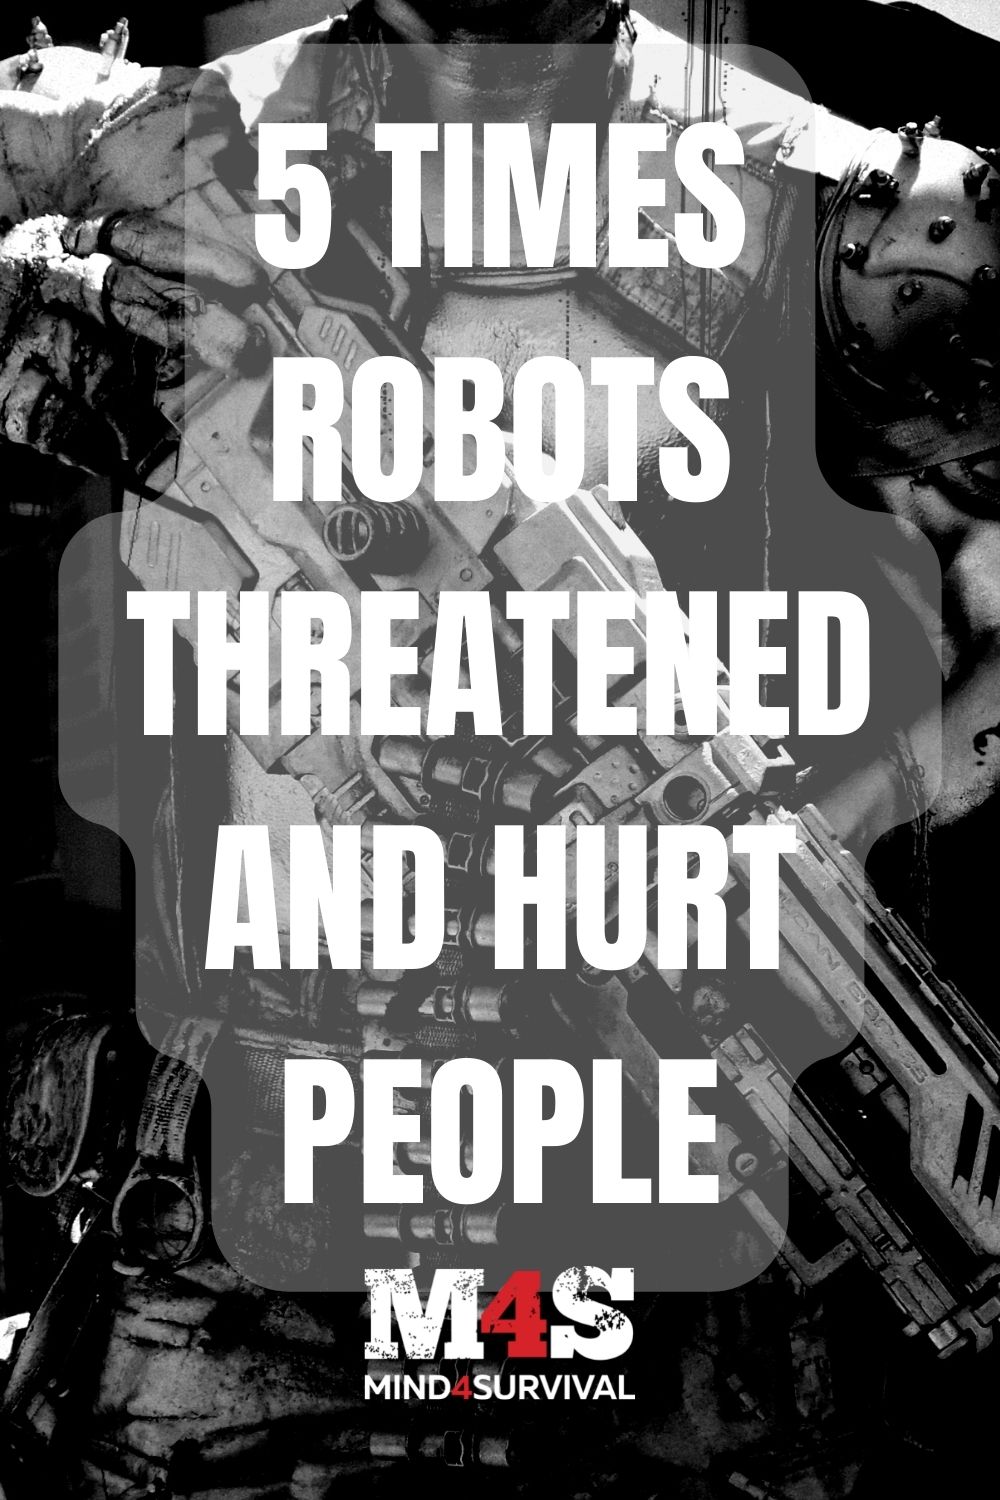 5 Times Robots Threatened and Hurt People